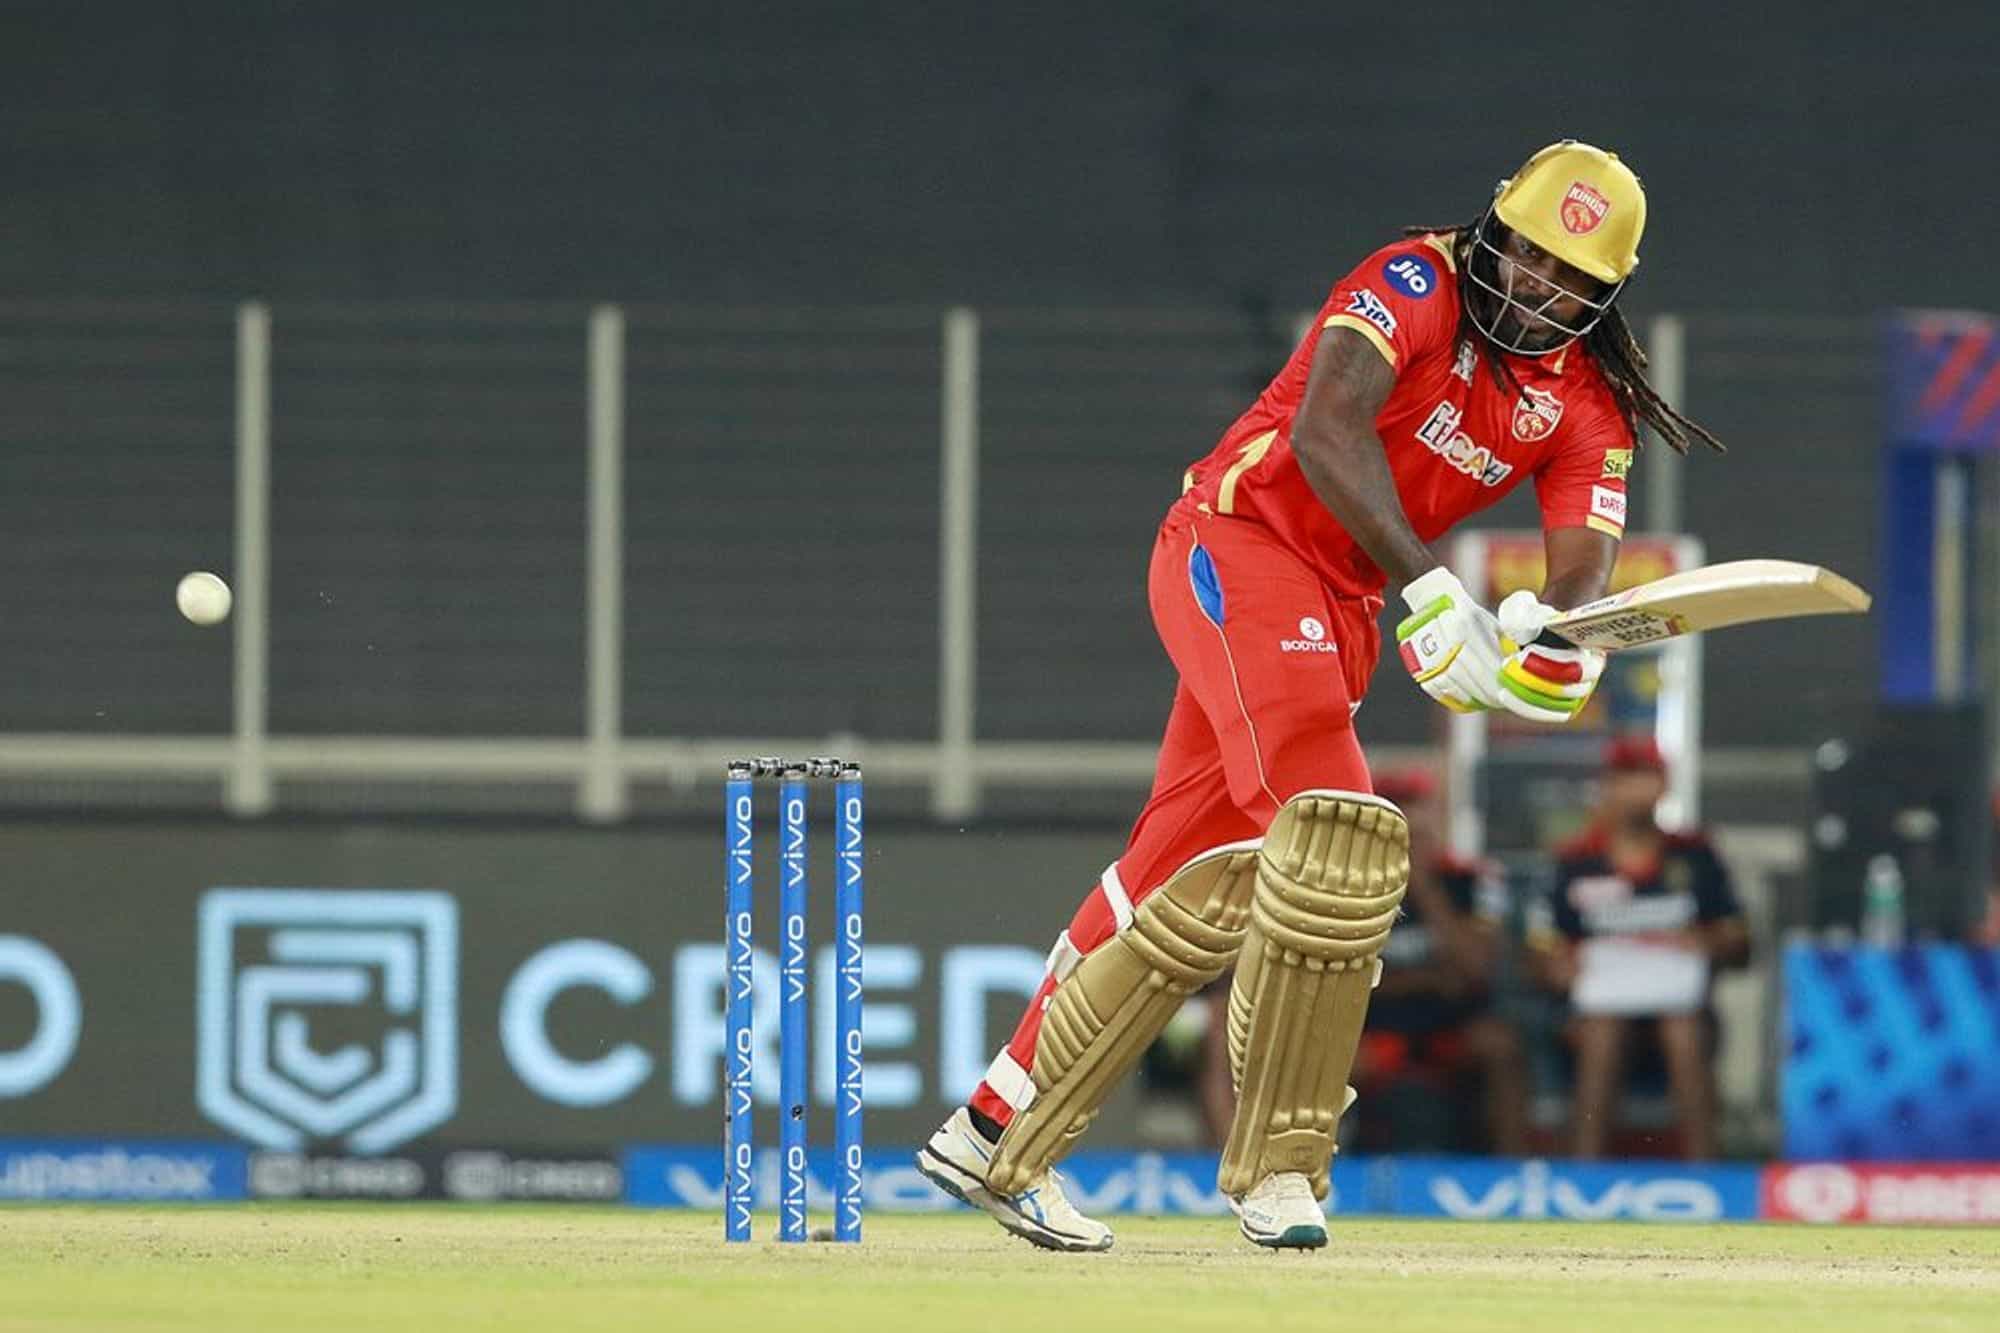 Watch: Chris Gayle Smashes Kyle Jamieson For 5 Fours In One Over